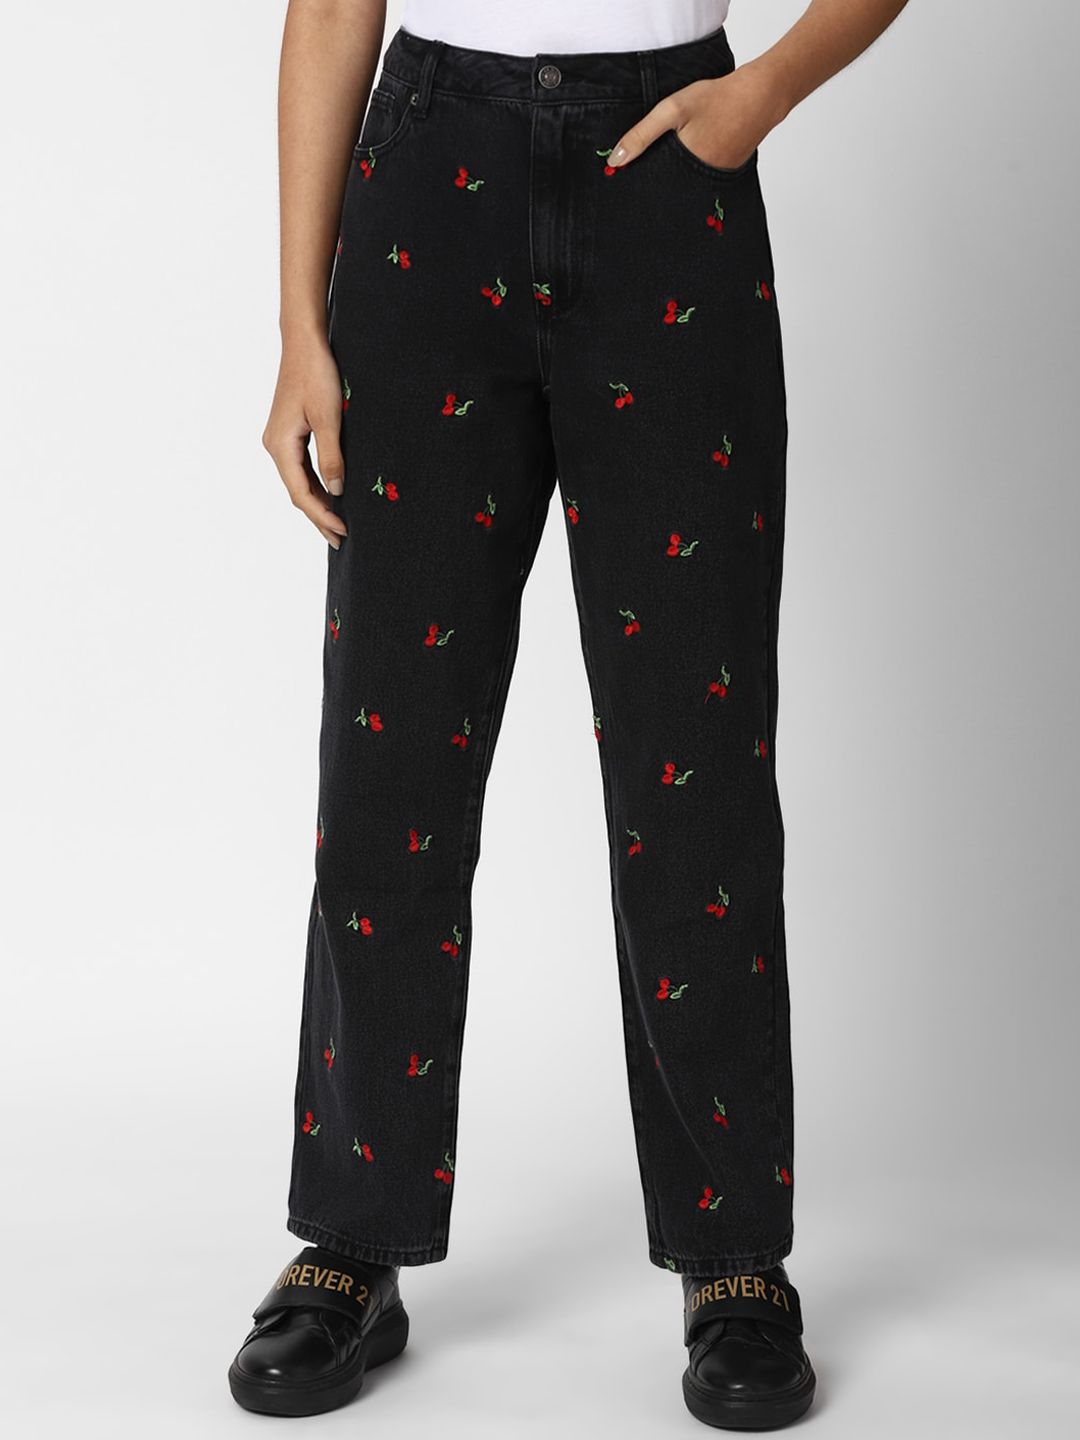 FOREVER 21 Women Black Printed Mid-Rise Jeans Price in India